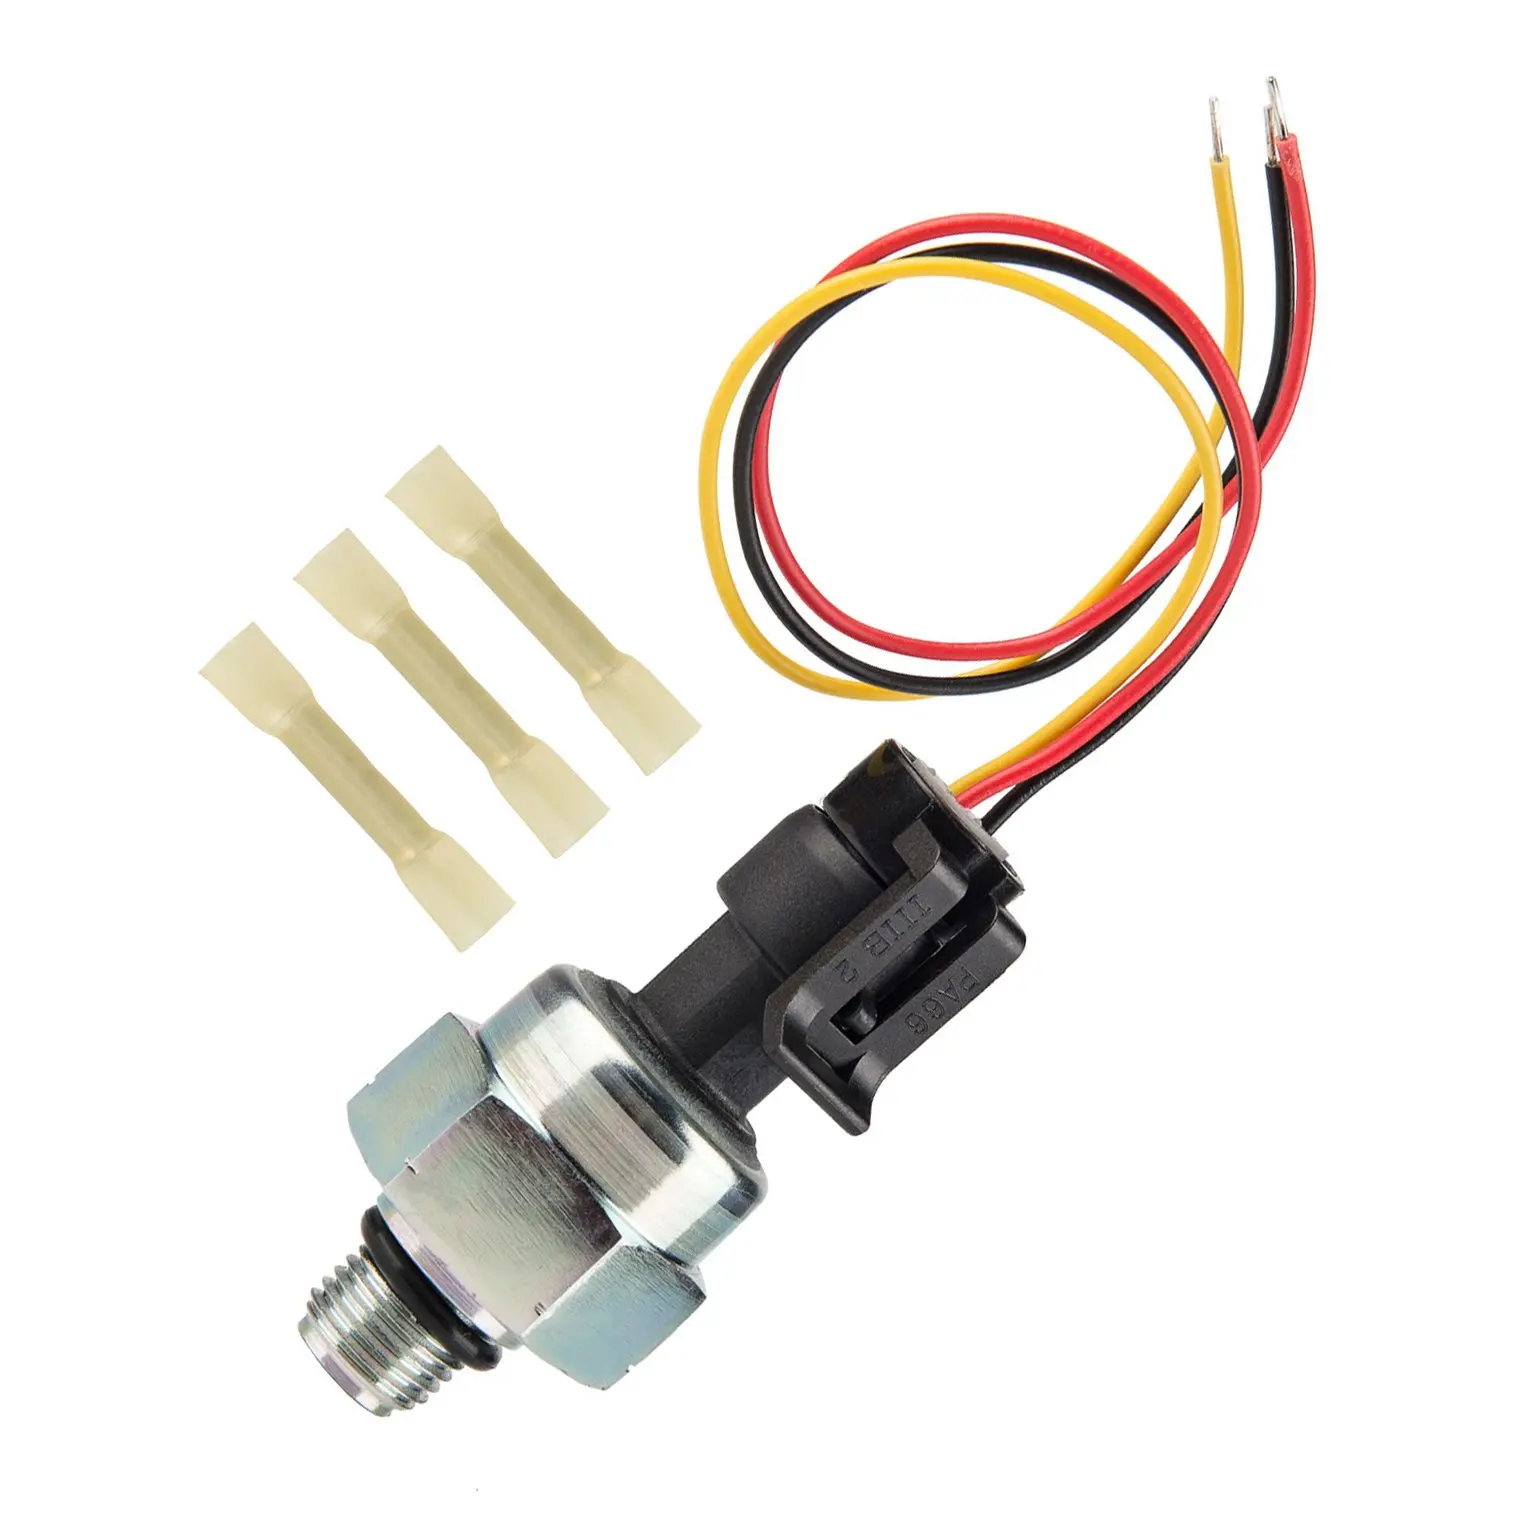 ICP Sensor for 1997-2003 Ford 7.3 7.3L Diesel Engines Powerstroke, Inject.....